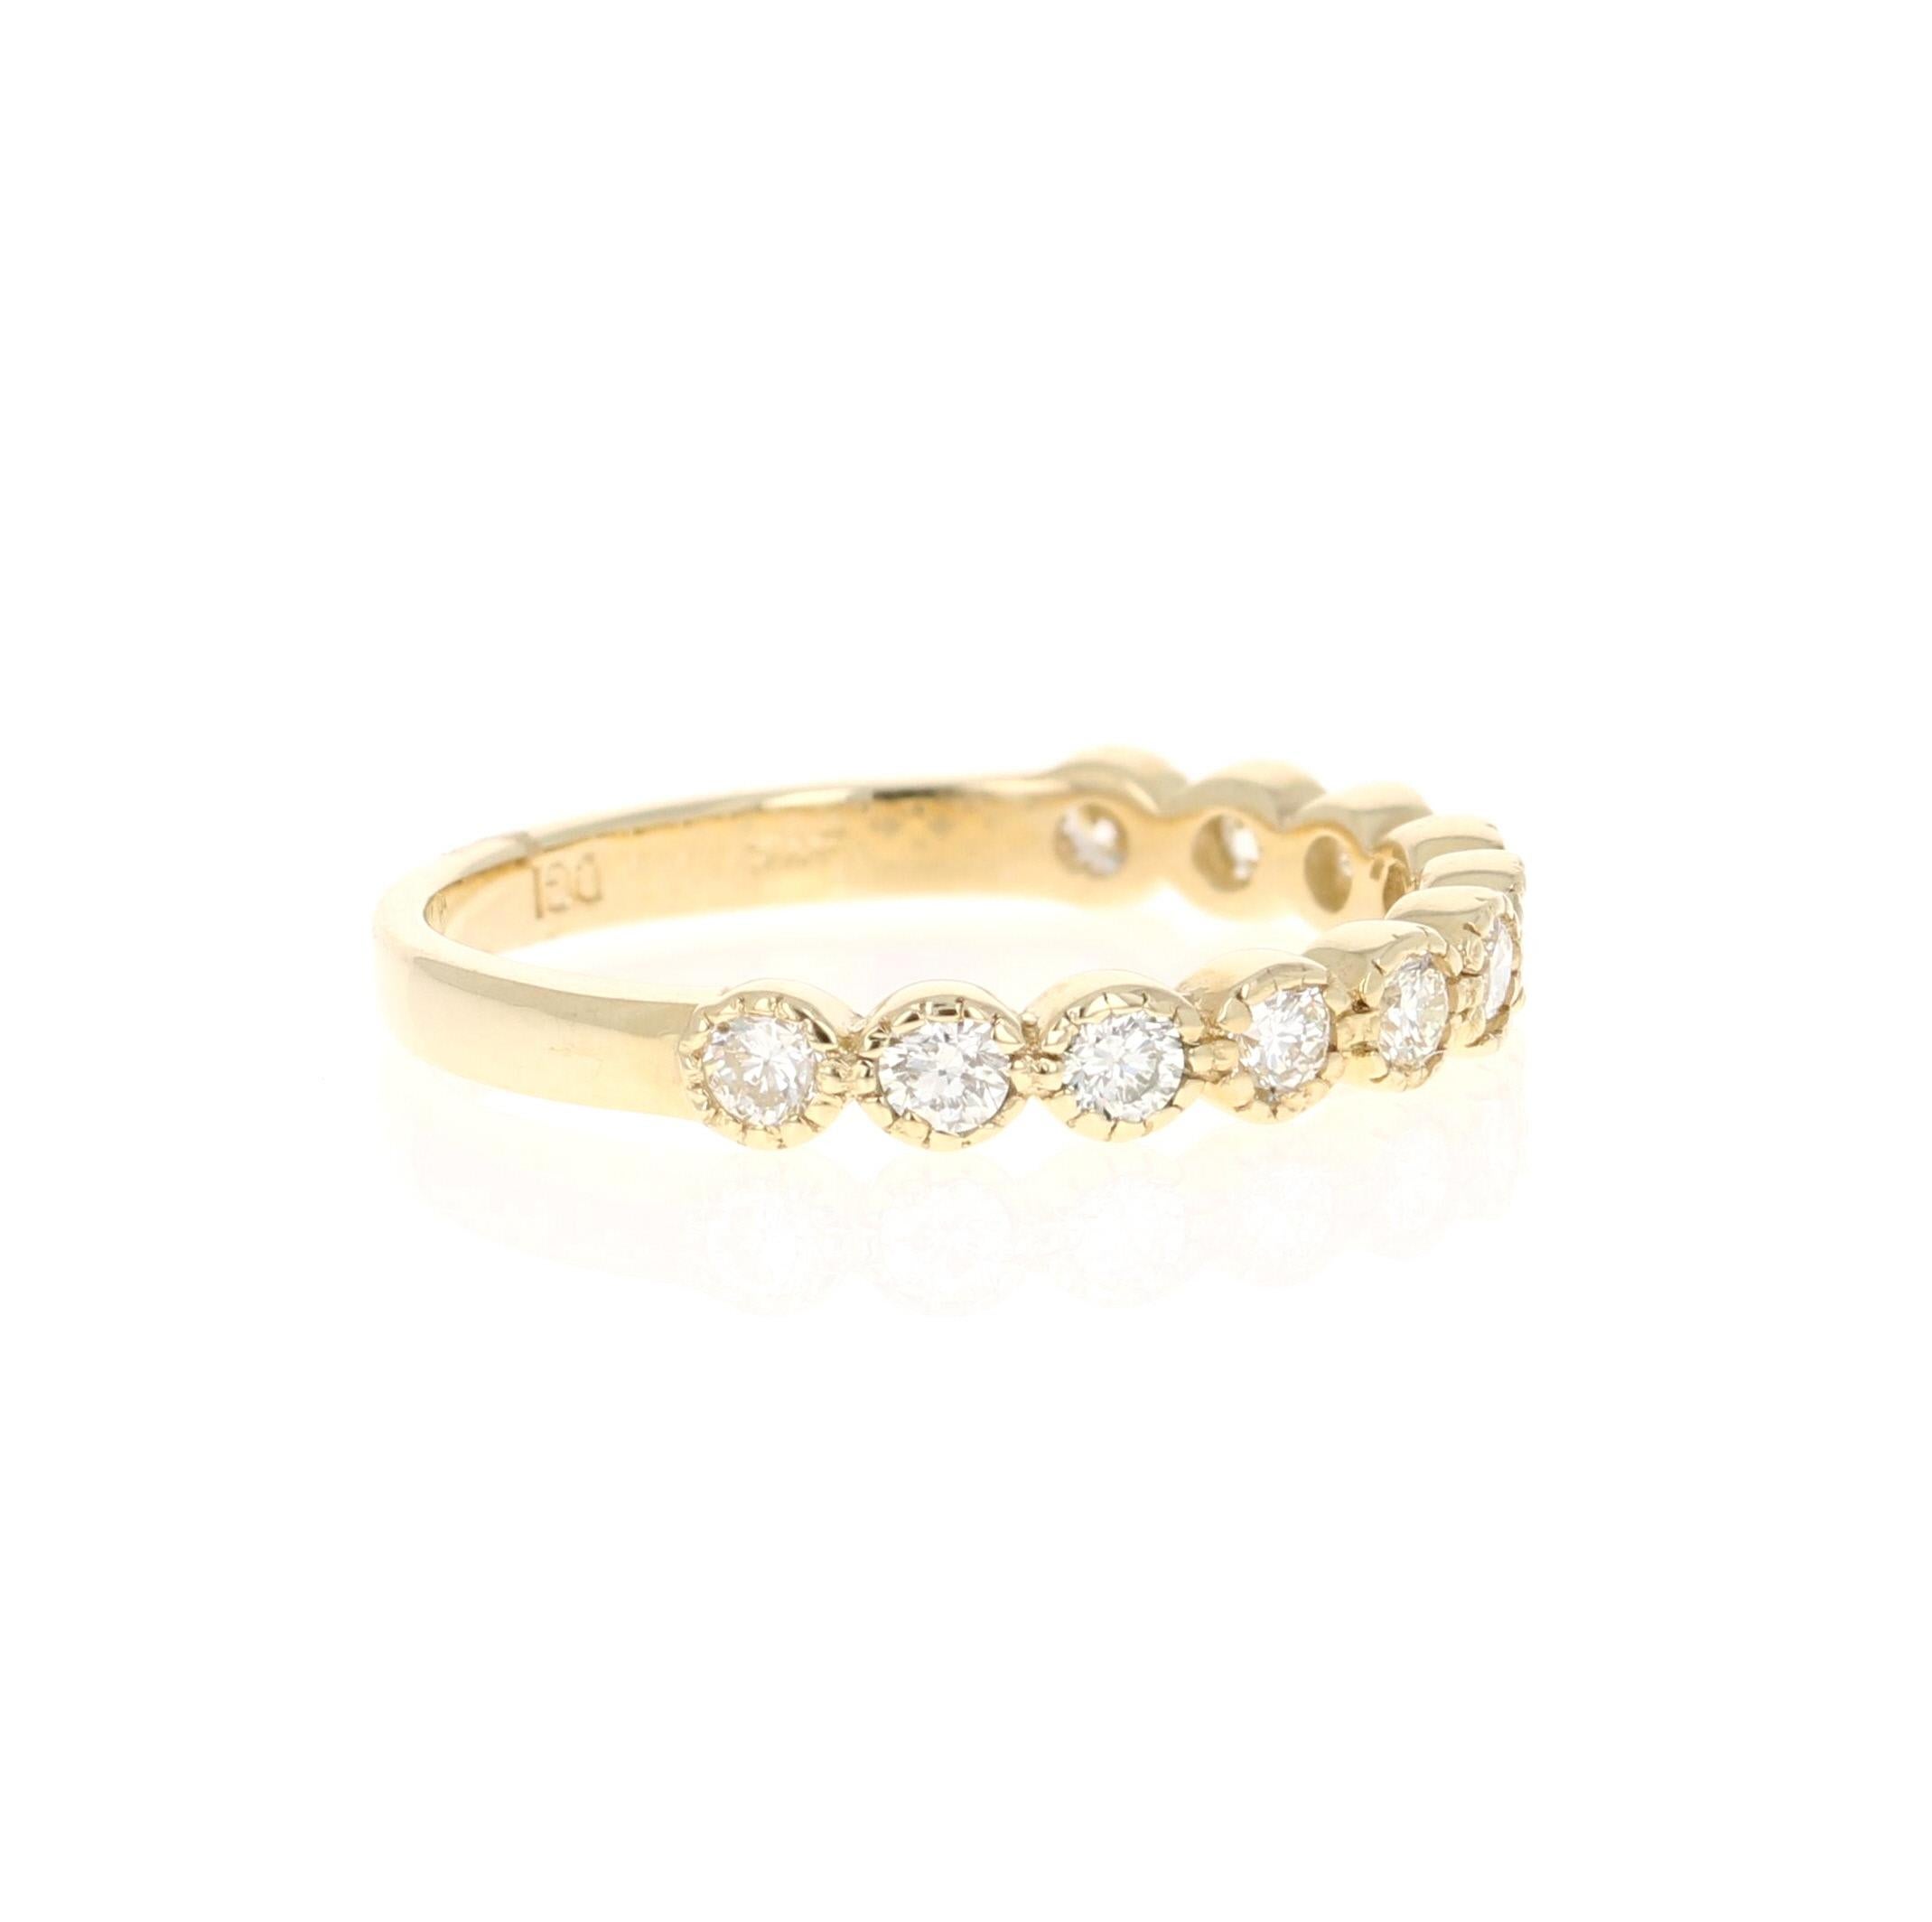 A beautiful band that can be worn as a single band or stack with other bands in other colors of Gold! 

This ring has 11 Round Cut Diamonds that weigh 0.44 Carats. The clarity and color of the diamonds are VS-H.

Crafted in 14 Karat Yellow Gold and